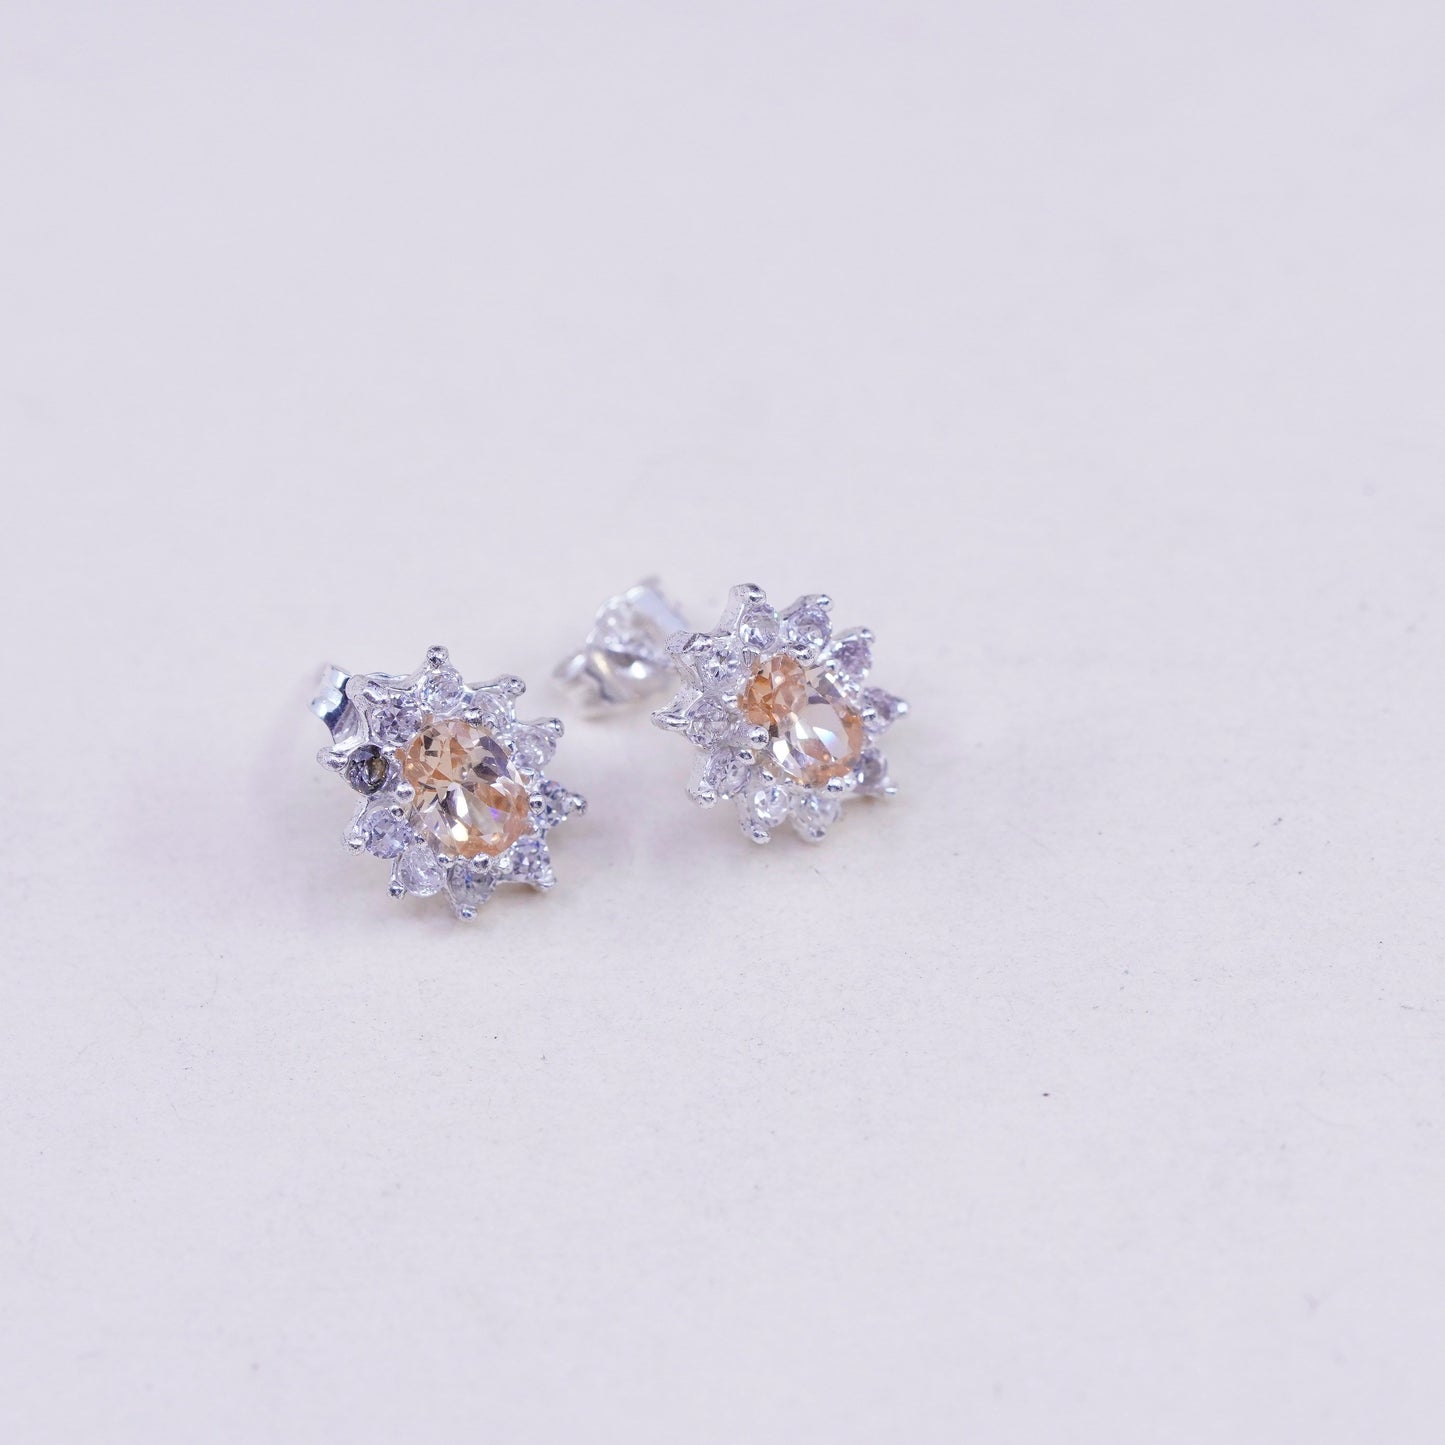 Vintage sterling silver studs earrings with citrine and cz around, earrings